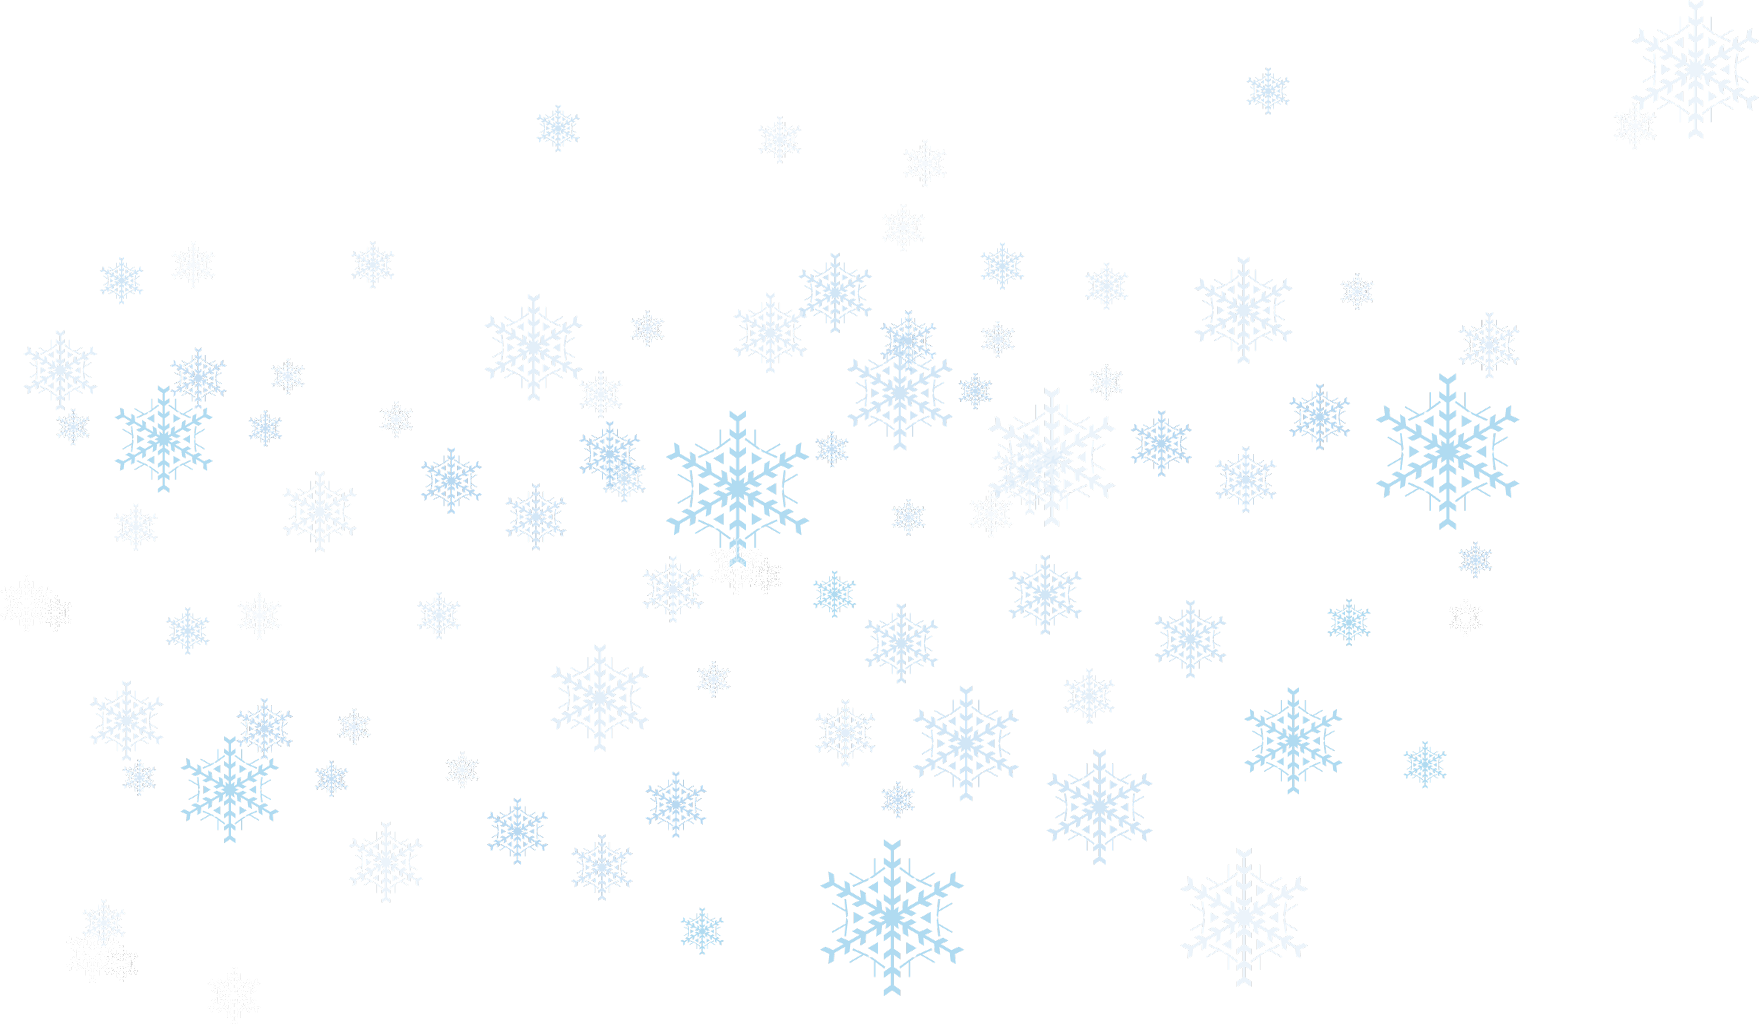 A Group Of Snowflakes On A Black Background